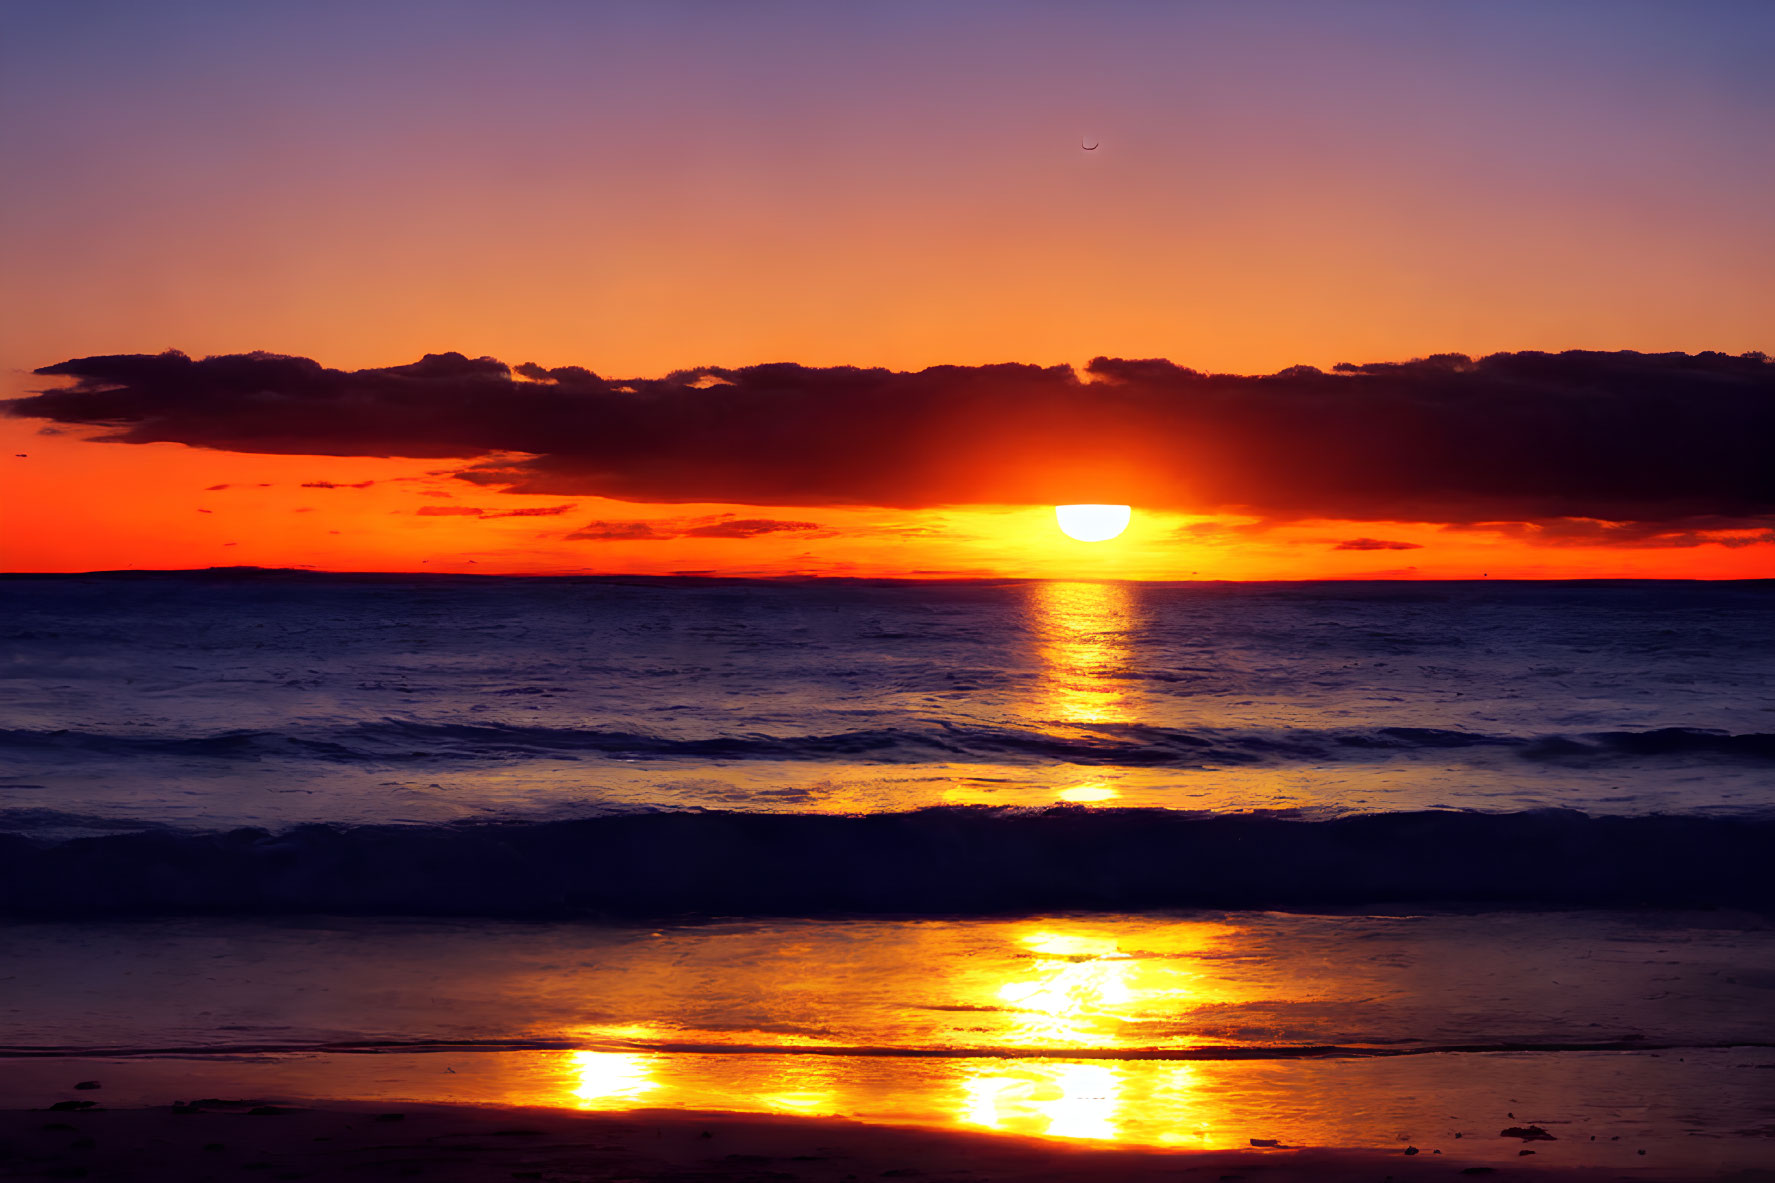 Vibrant ocean sunset with orange sun and crescent moon in twilight